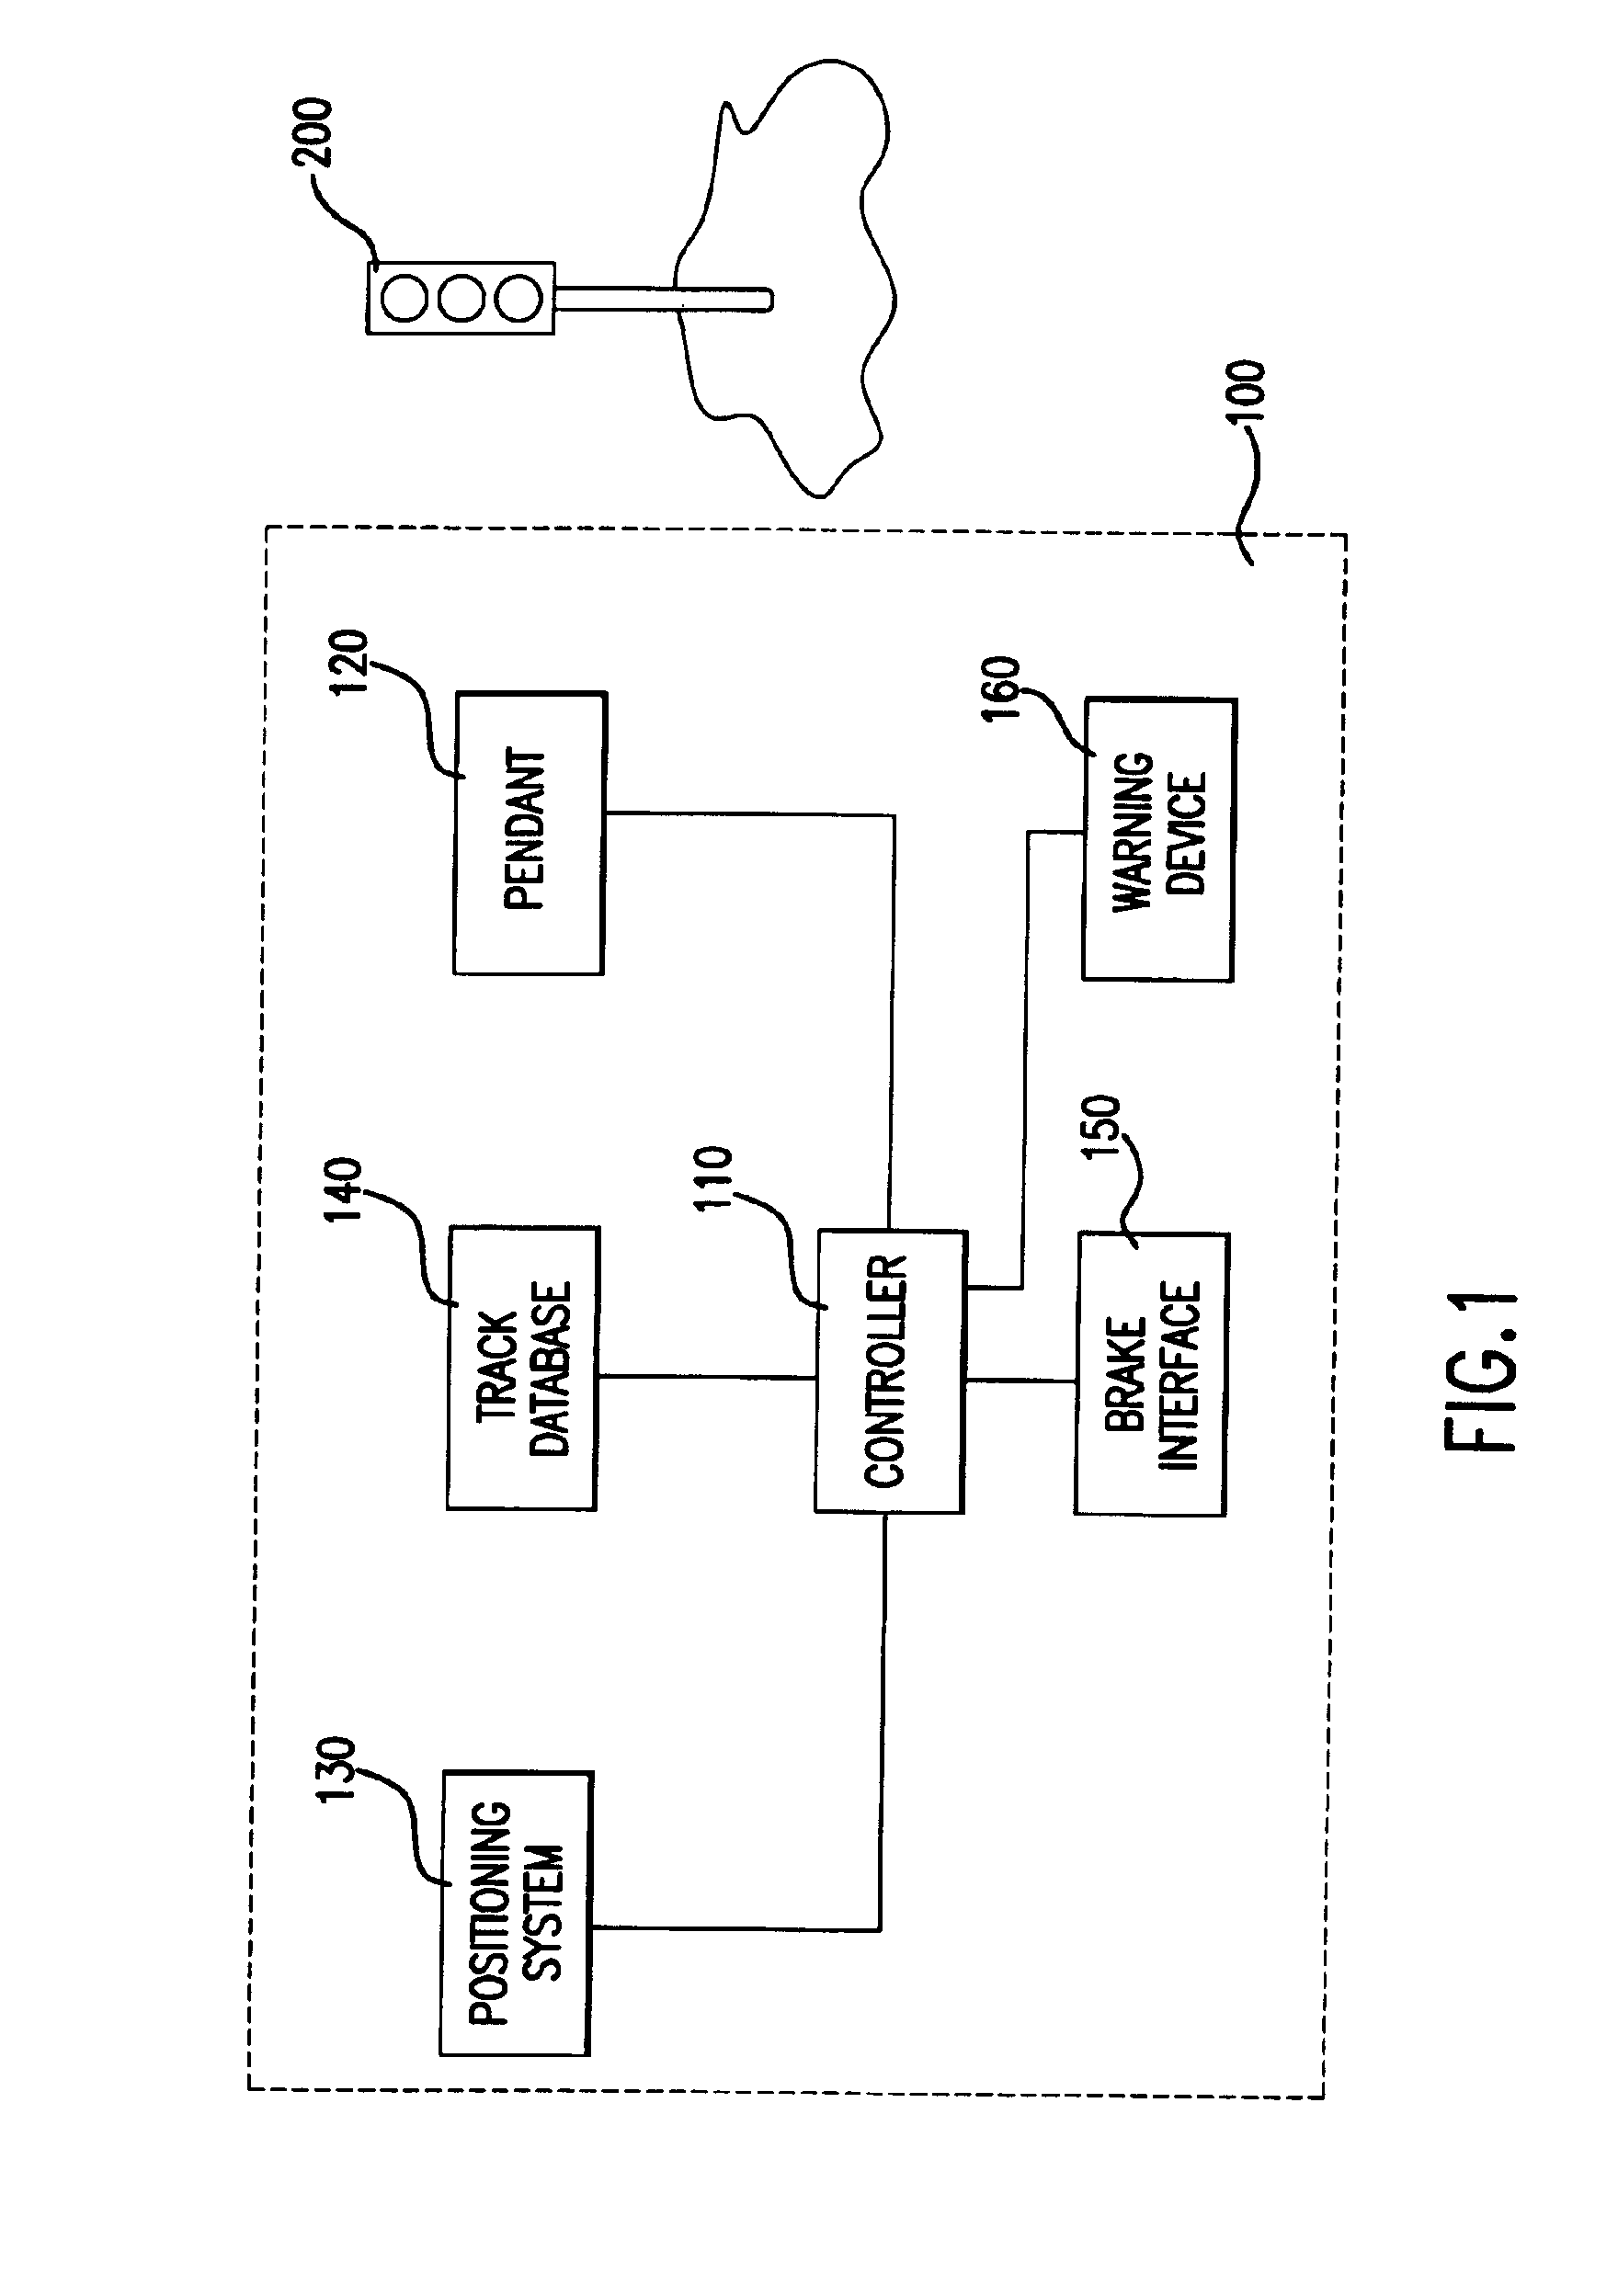 Method and system for ensuring that a train operator remains alert during operation of the train